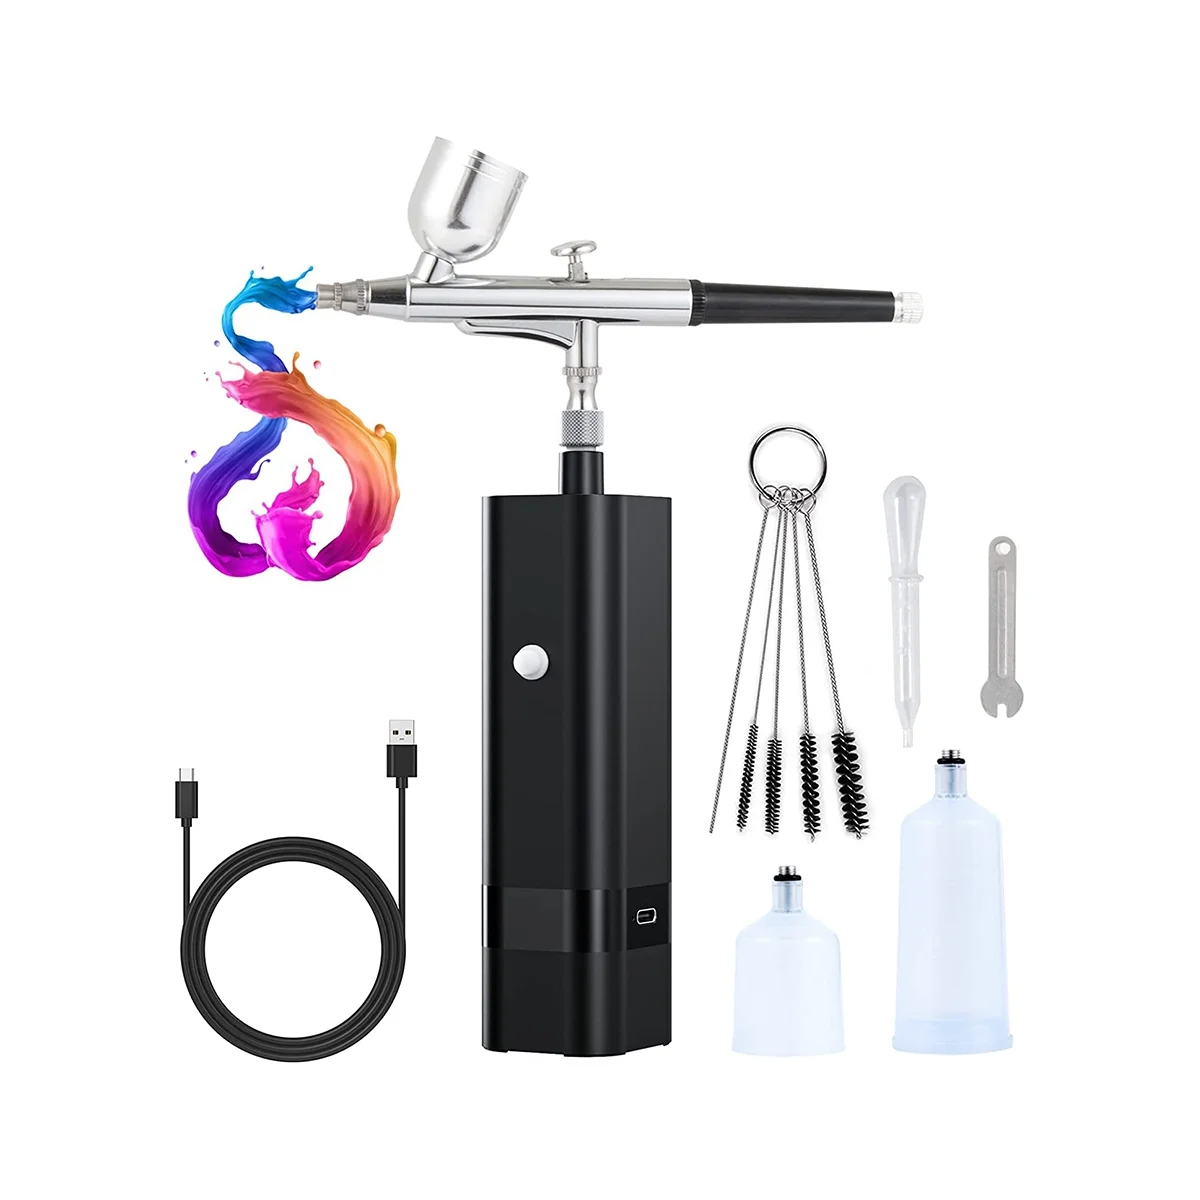 

Cordless Airbrush Kit with Compressor,32 PSI Handheld Air Brush Set, Dual Action Airbrush for Nail Art,Painting,Decor